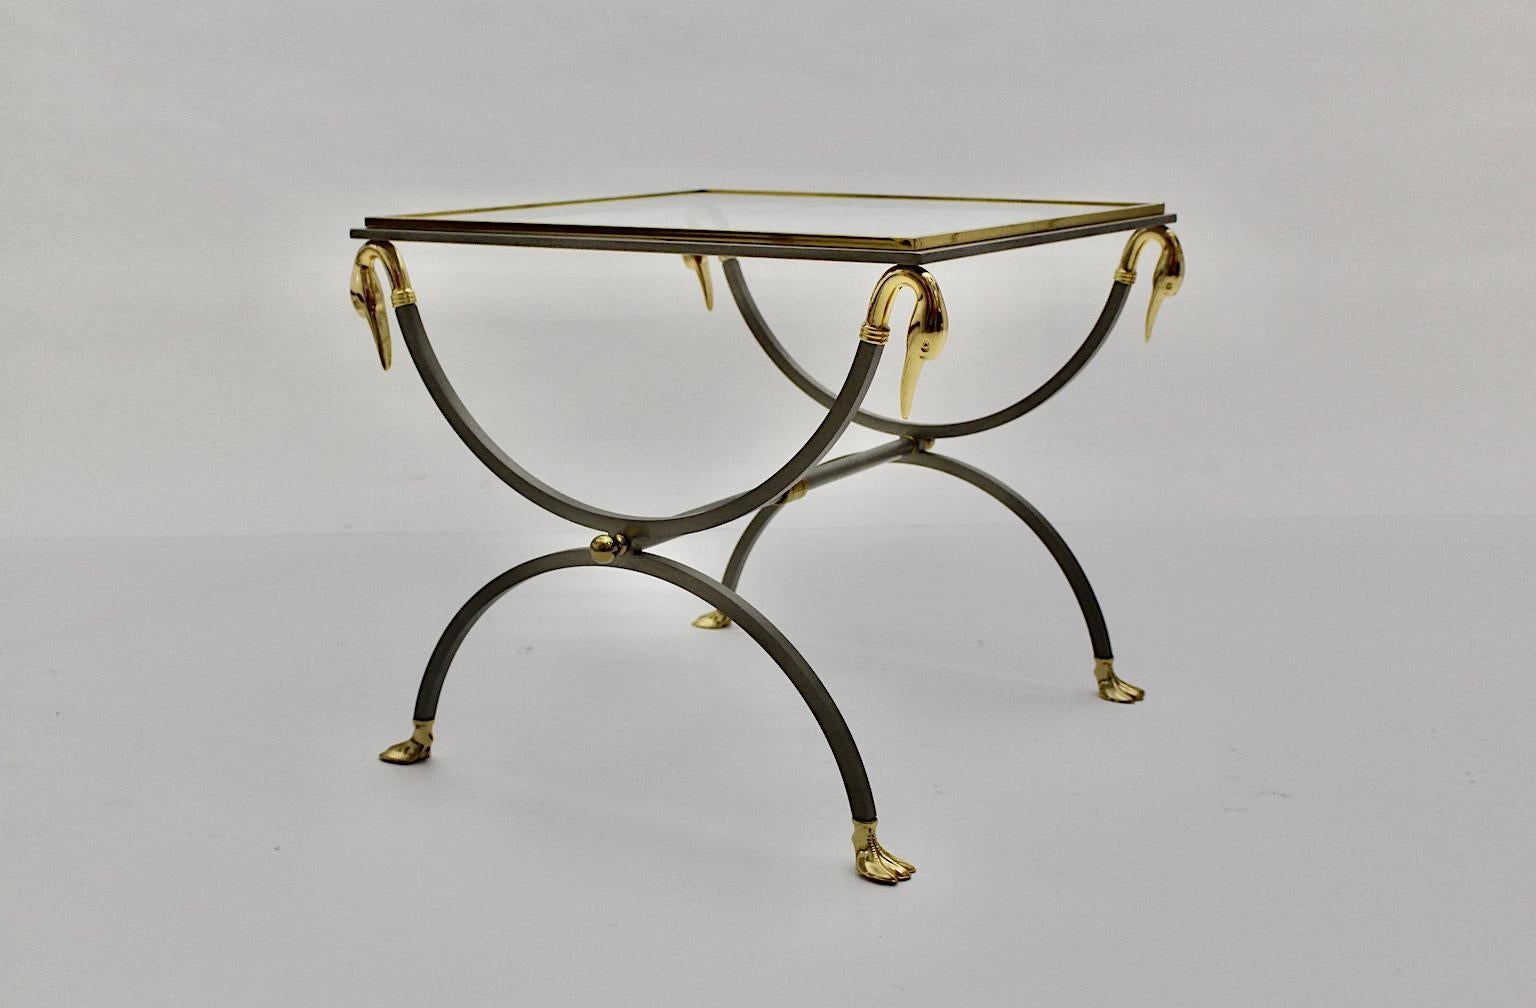  Maison Jansen coffee table or side table, which was designed in France, circa 1970. The high quality coffee table was made of brushed stainless steel and gilded details like swan heads and feet.
Very good condition with minor signs of age.
Approx.